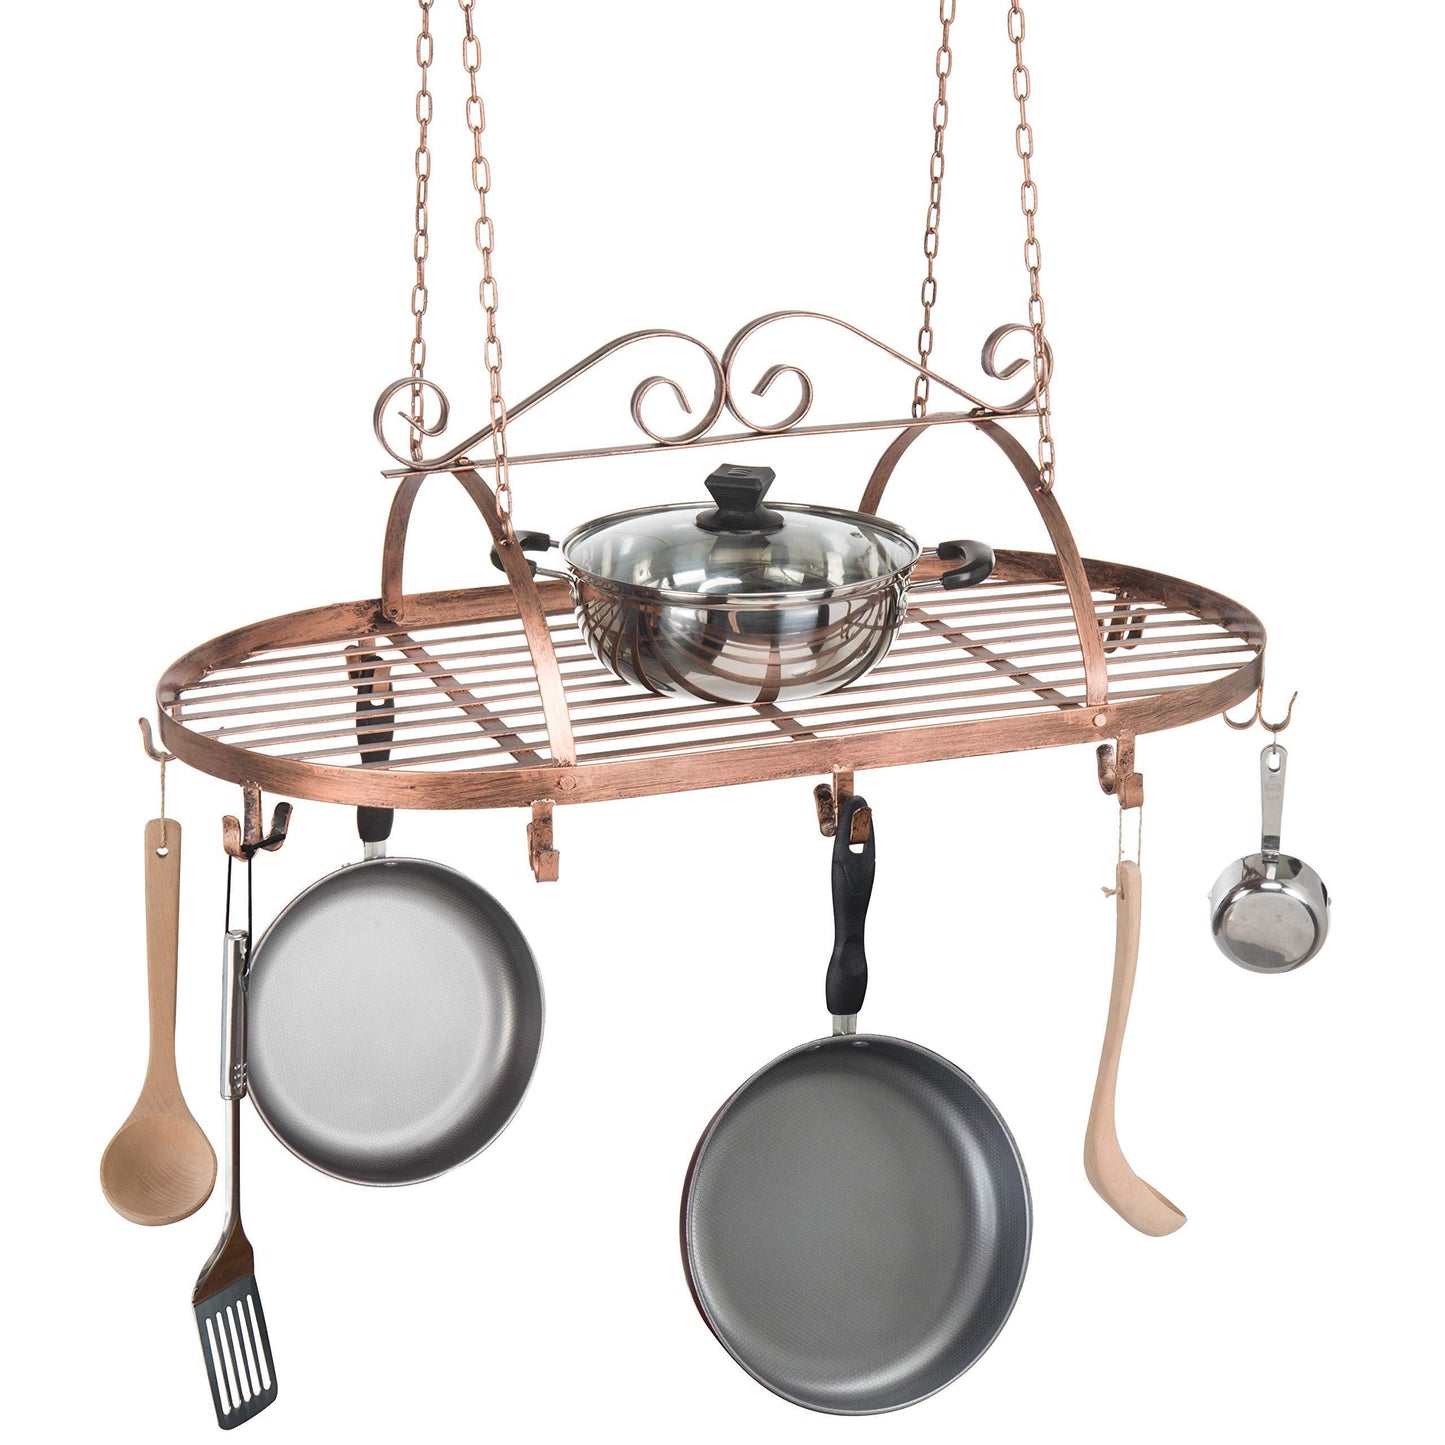 Discover the bronze tone scrollwork metal ceiling mounted hanging rack for kitchen utensils pots pans holder